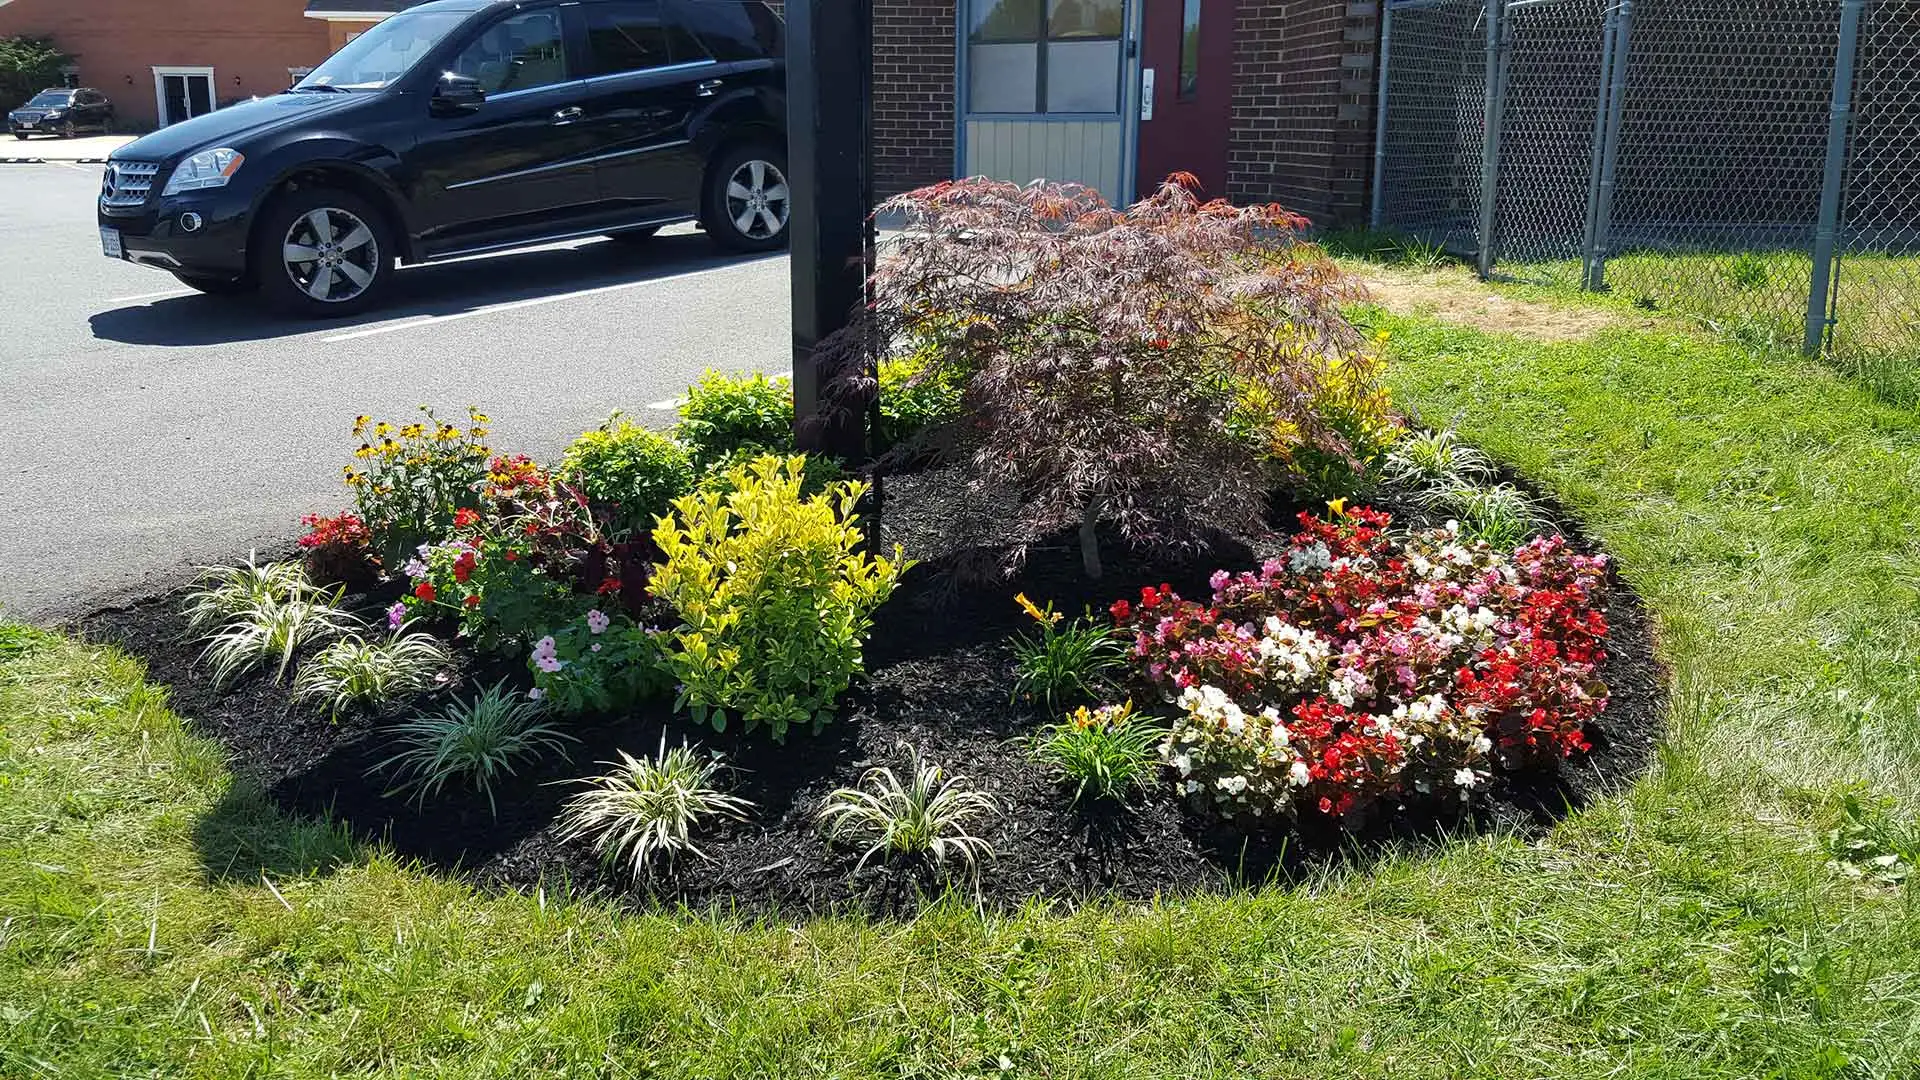 Commercial property landscaping in Bristow, VA